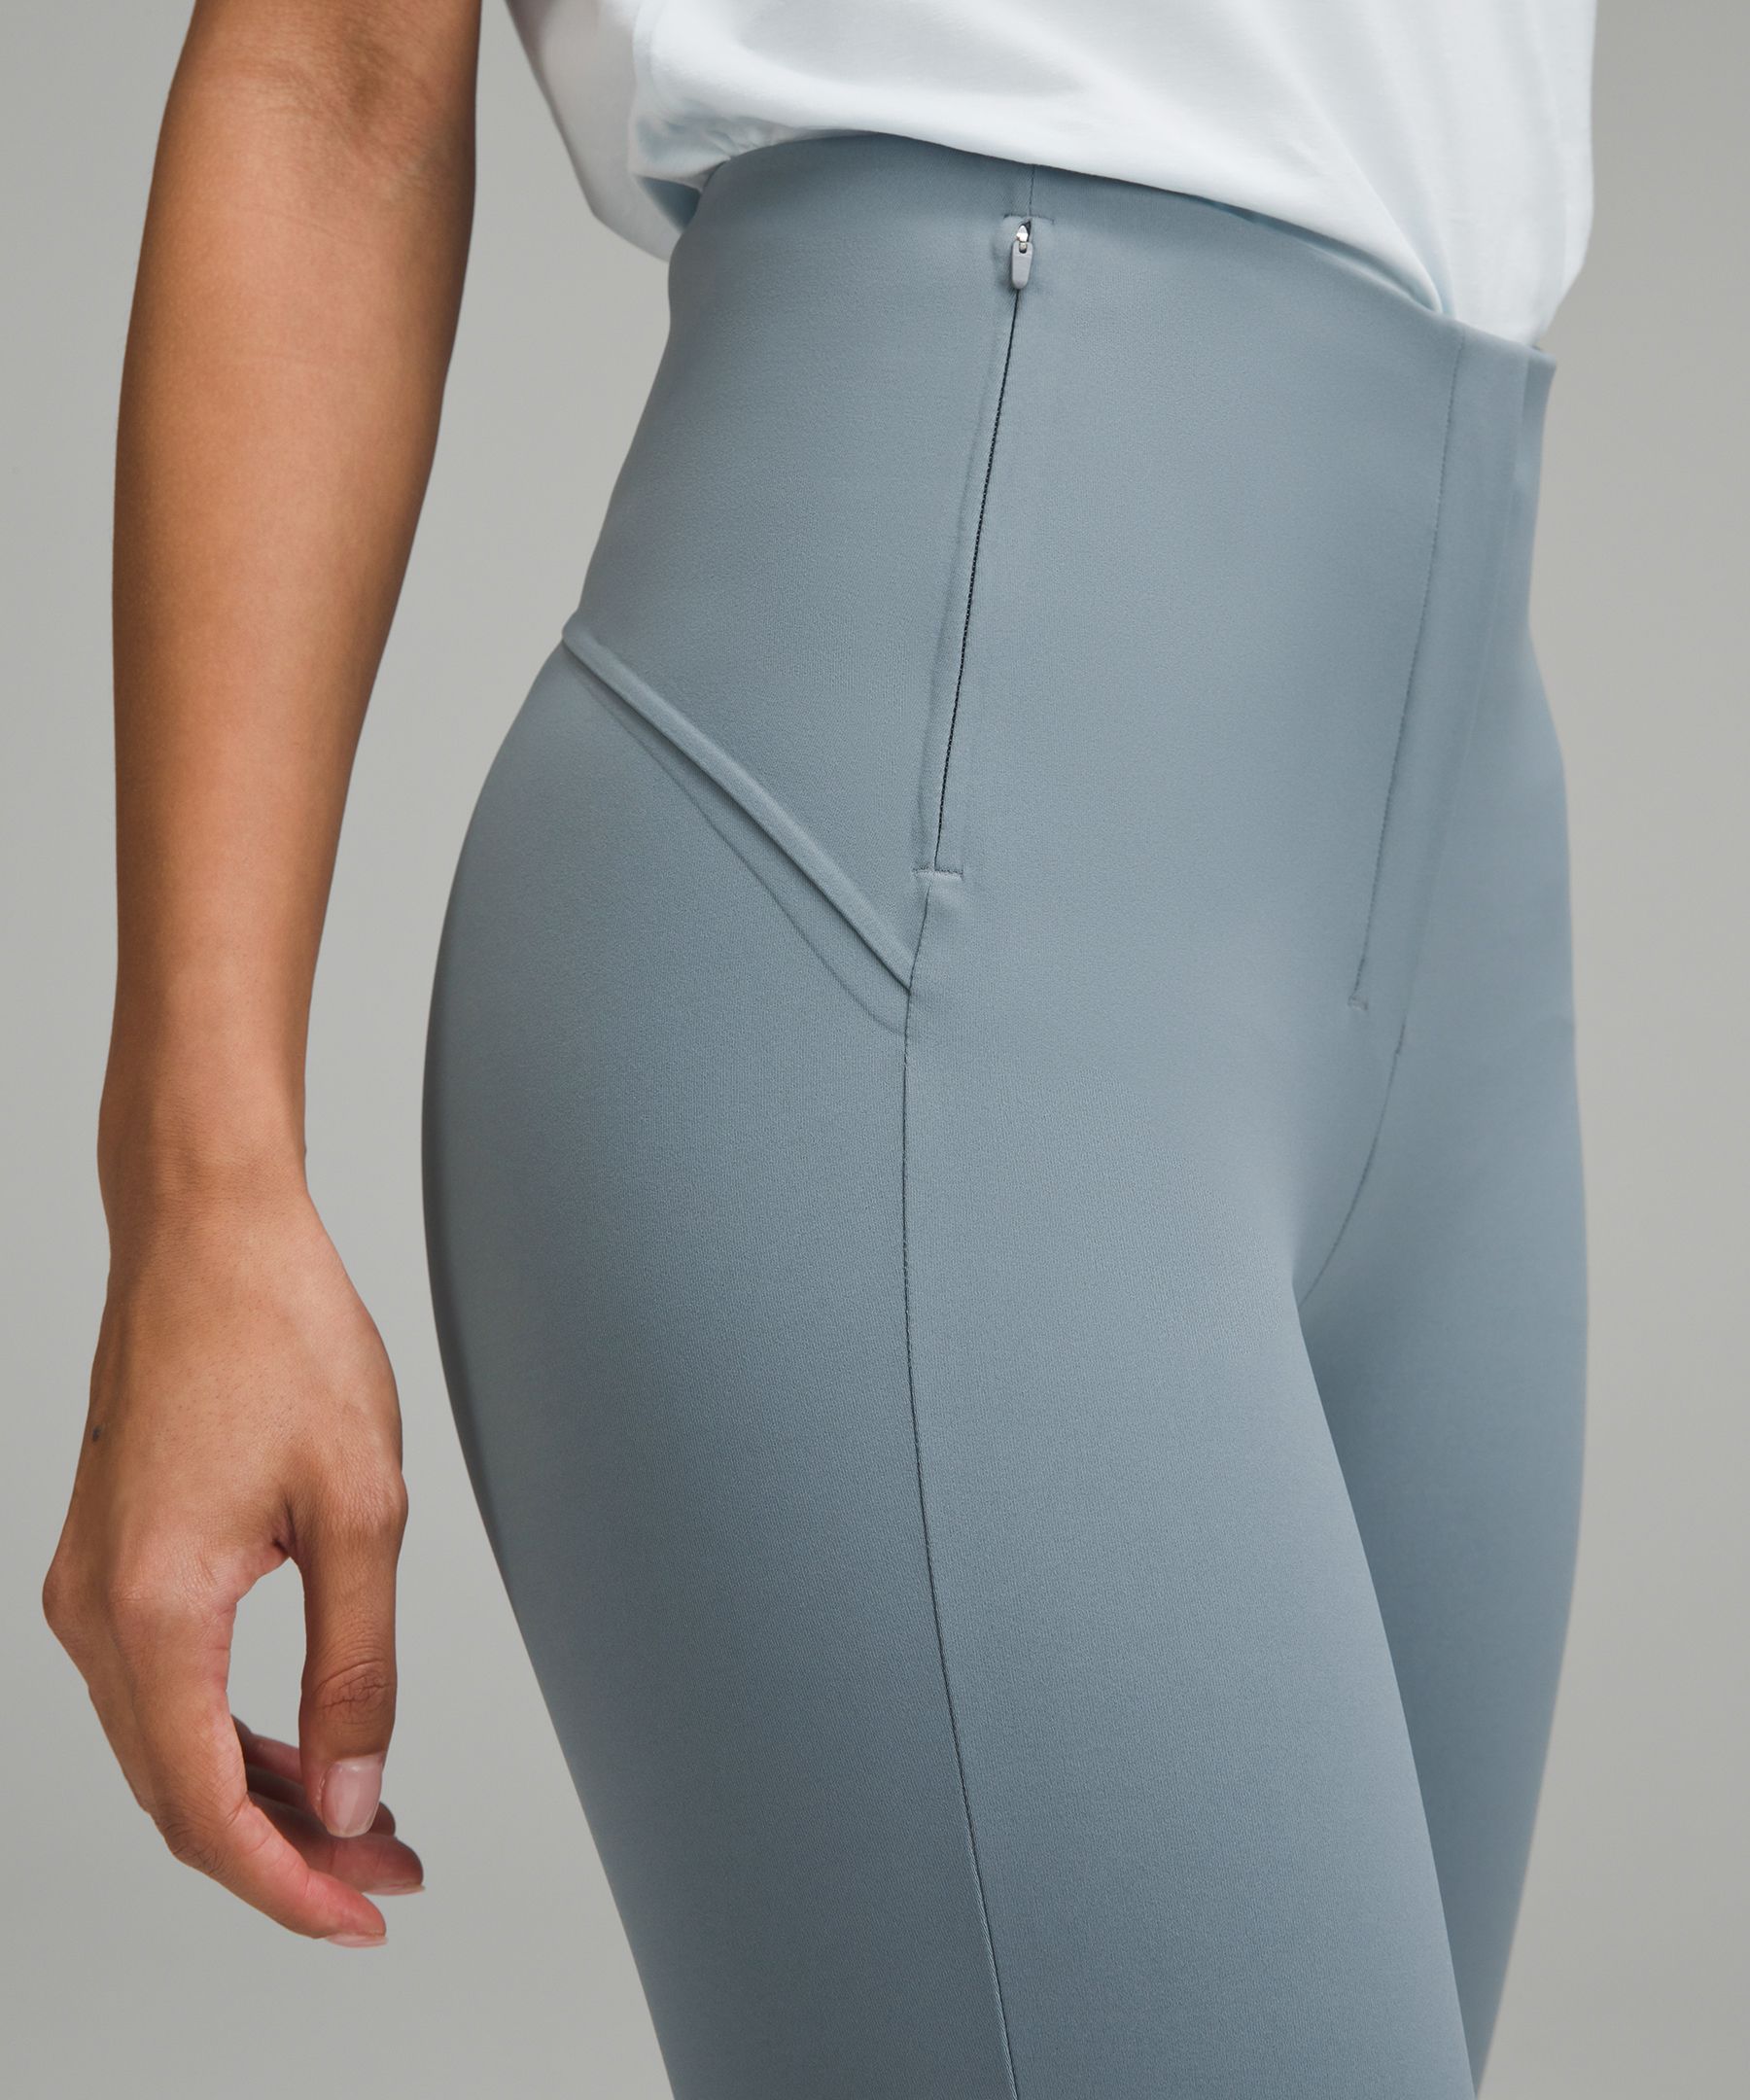 Smooth Fit Pull-On High-Rise Pant, Women's Trousers